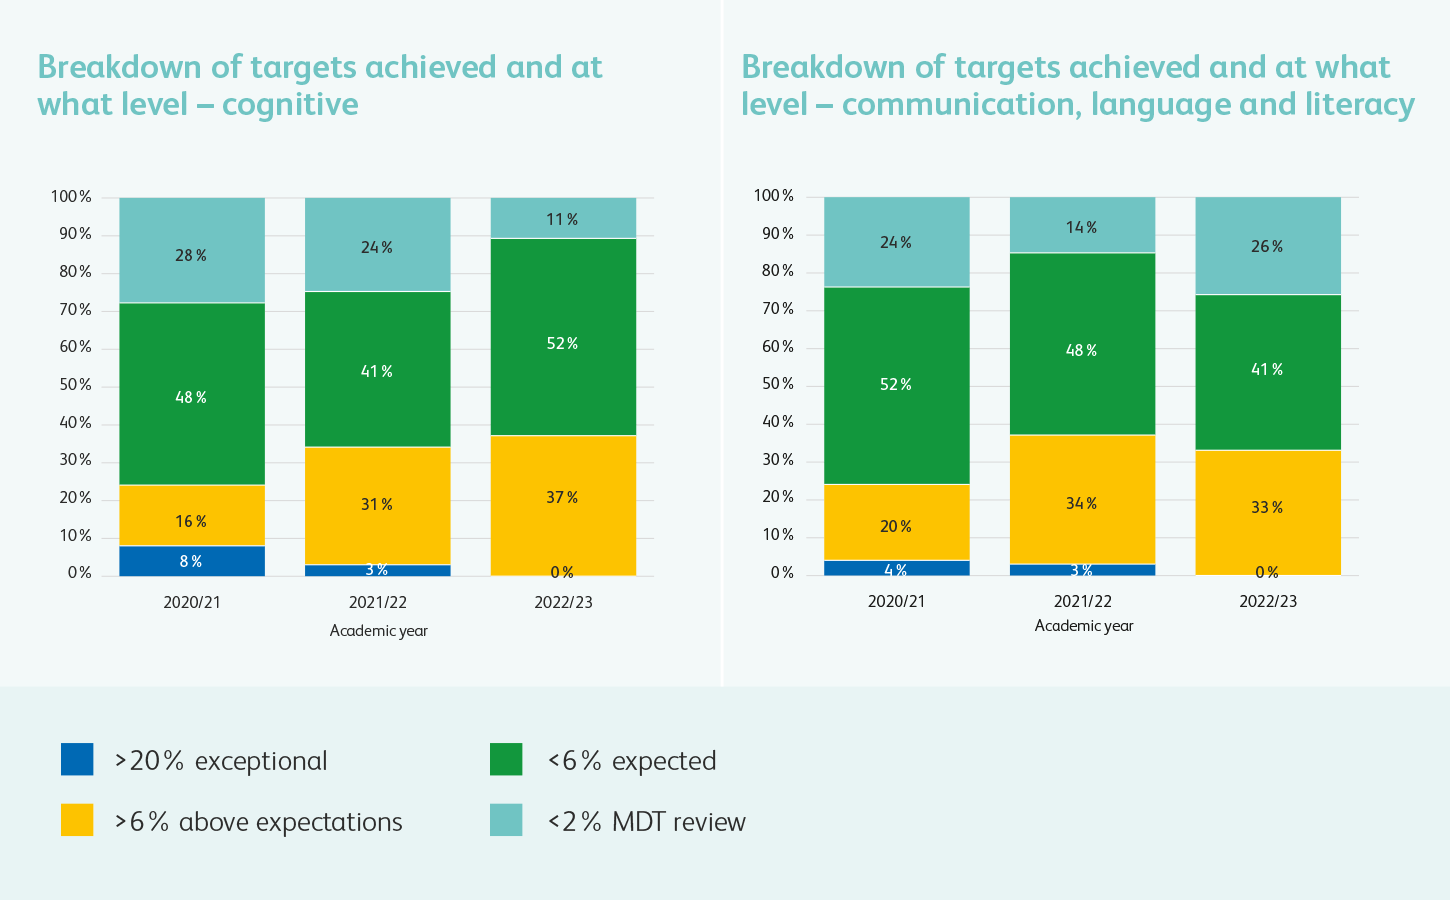 Breakdown of targets achieved and at what level in relation to cognitive, communication, language and literacy